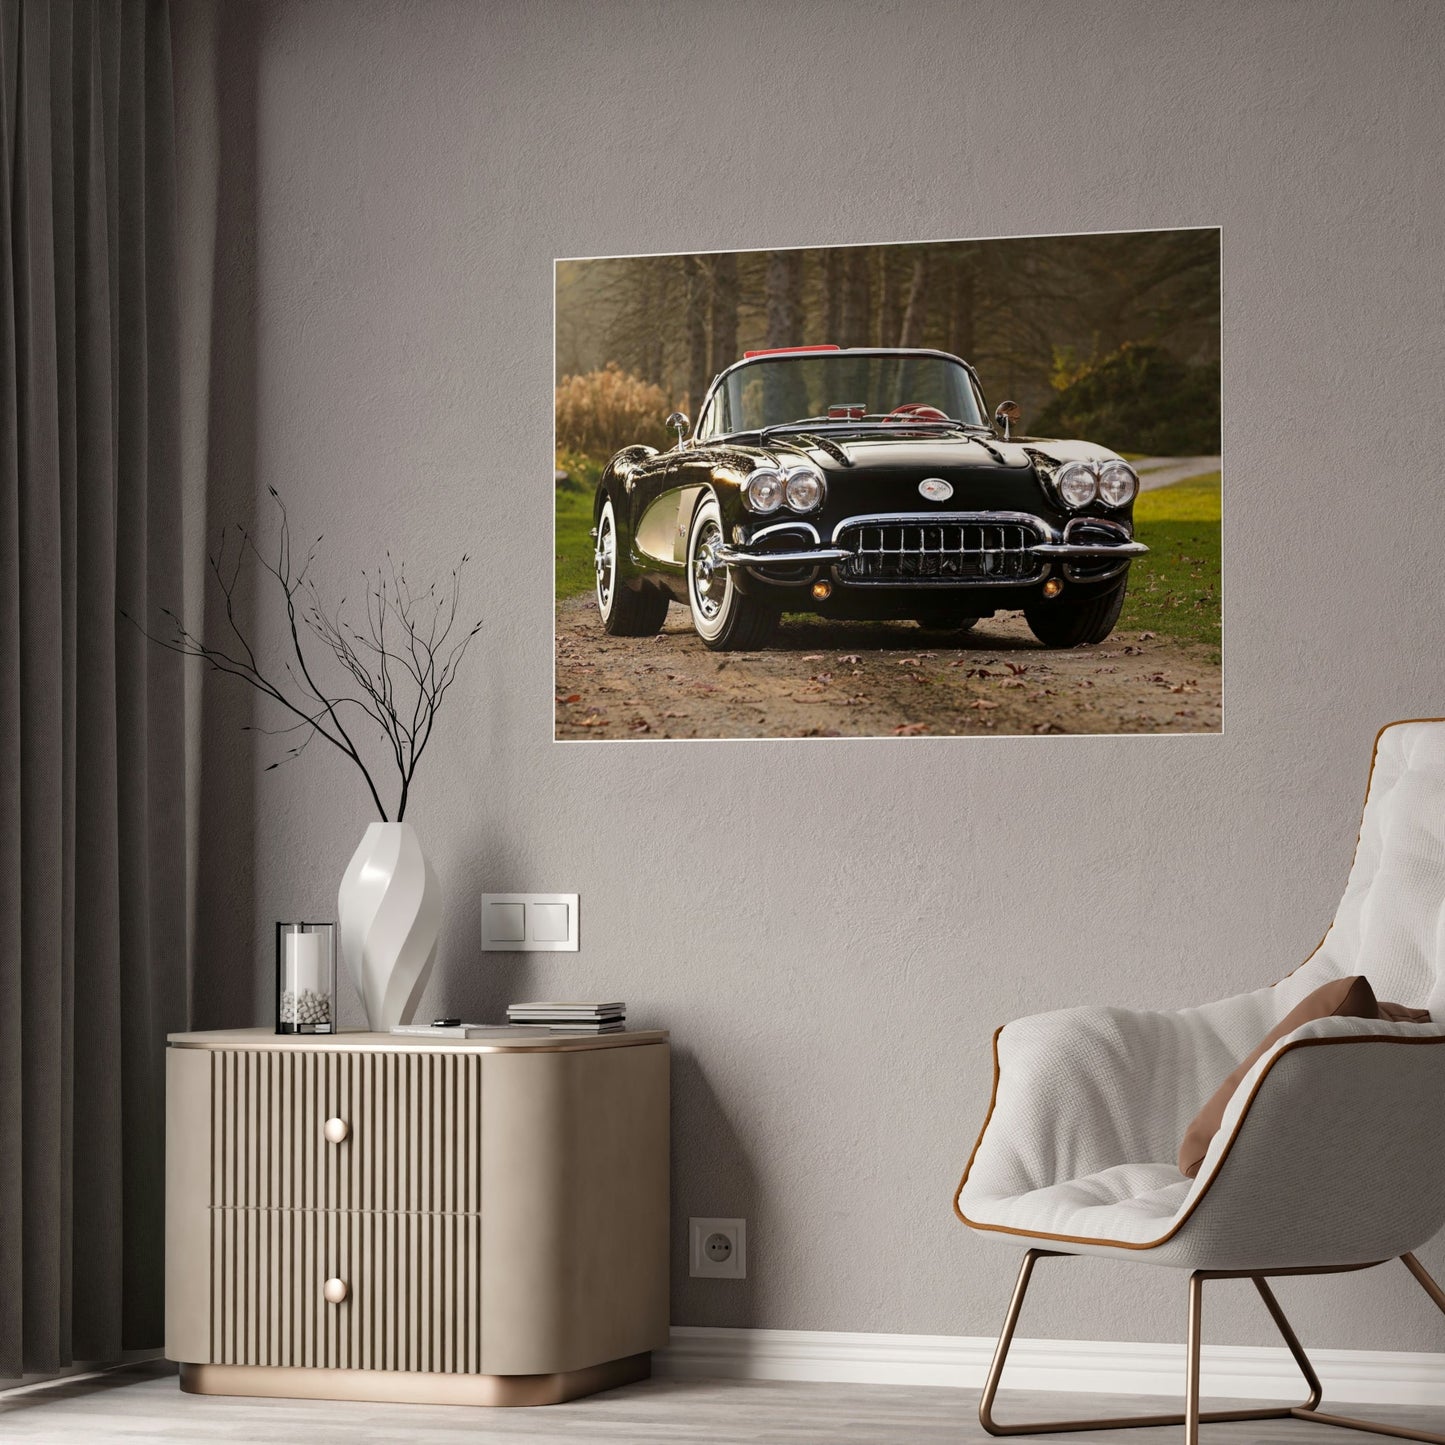 Chevy Style: Wall Art Featuring the Best of Chevrolet Design and Craftsmanship